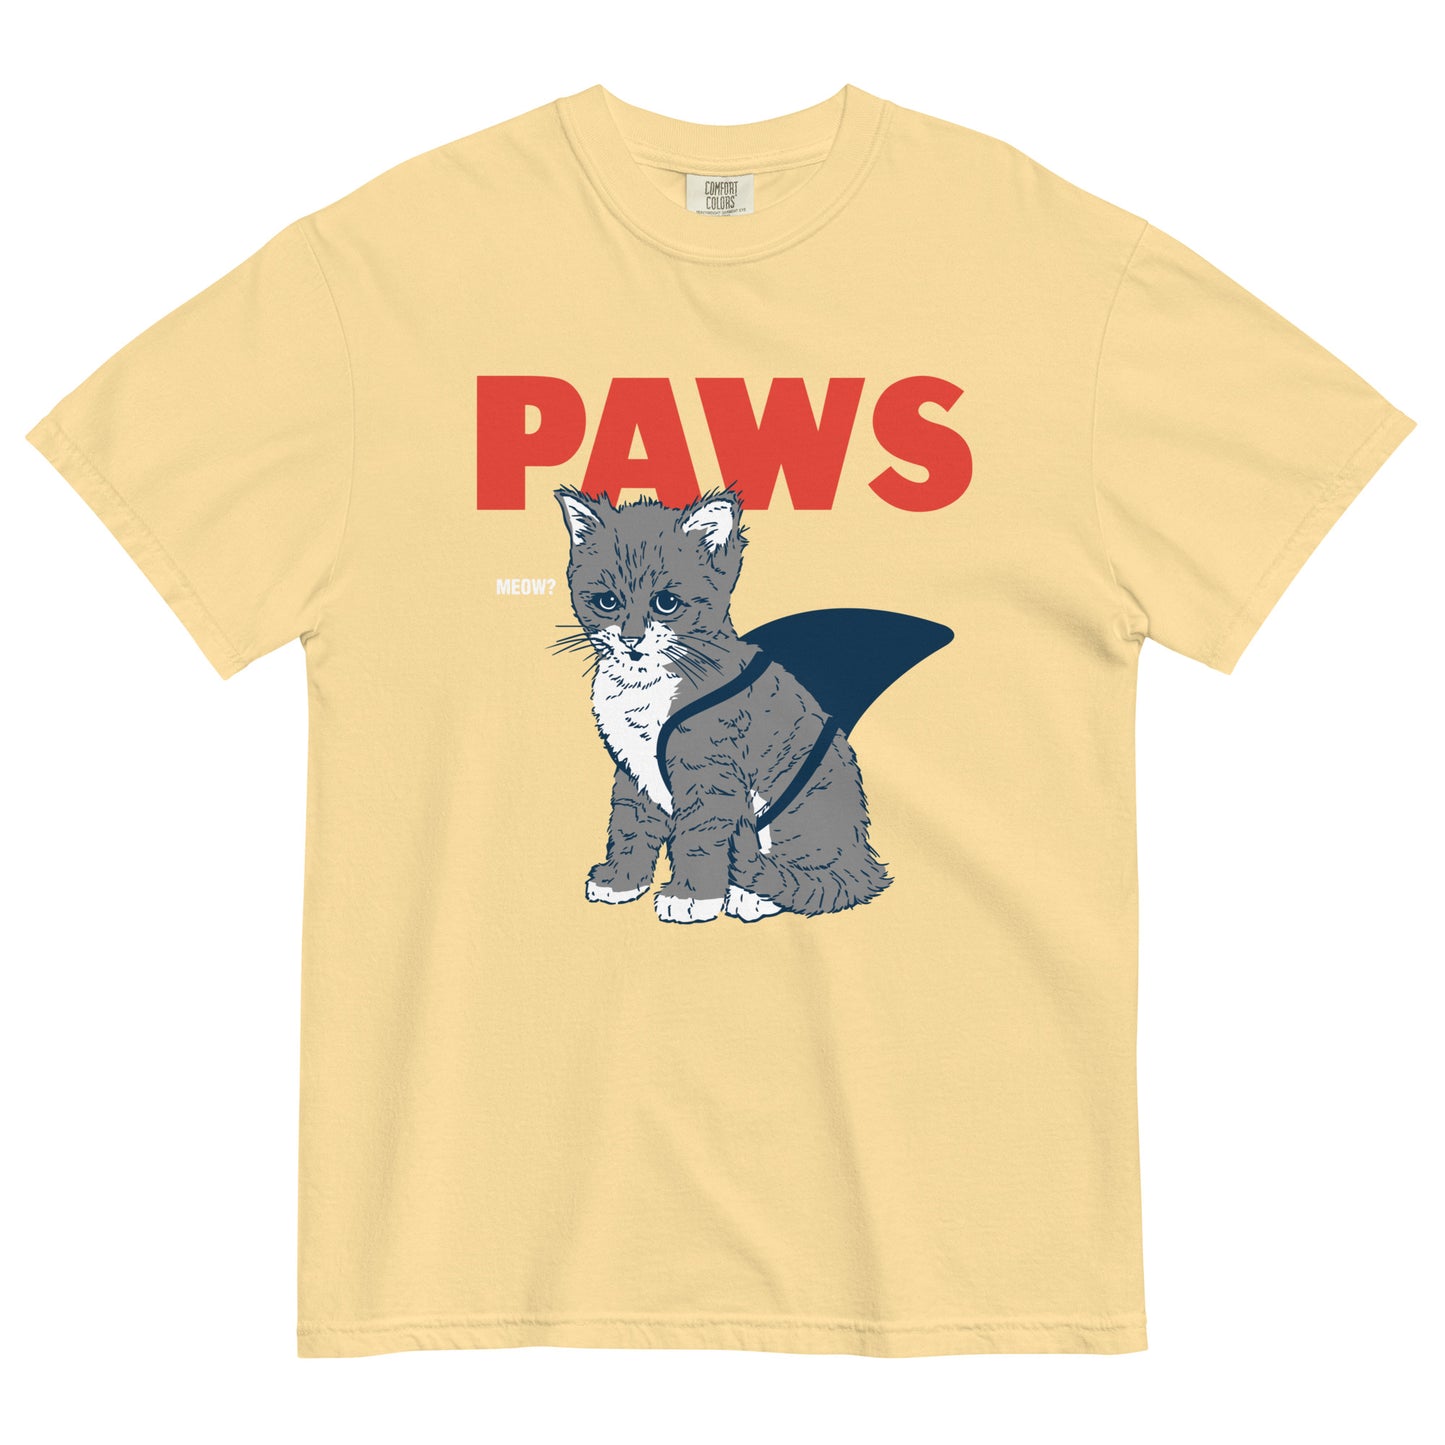 Paws Men's Relaxed Fit Tee